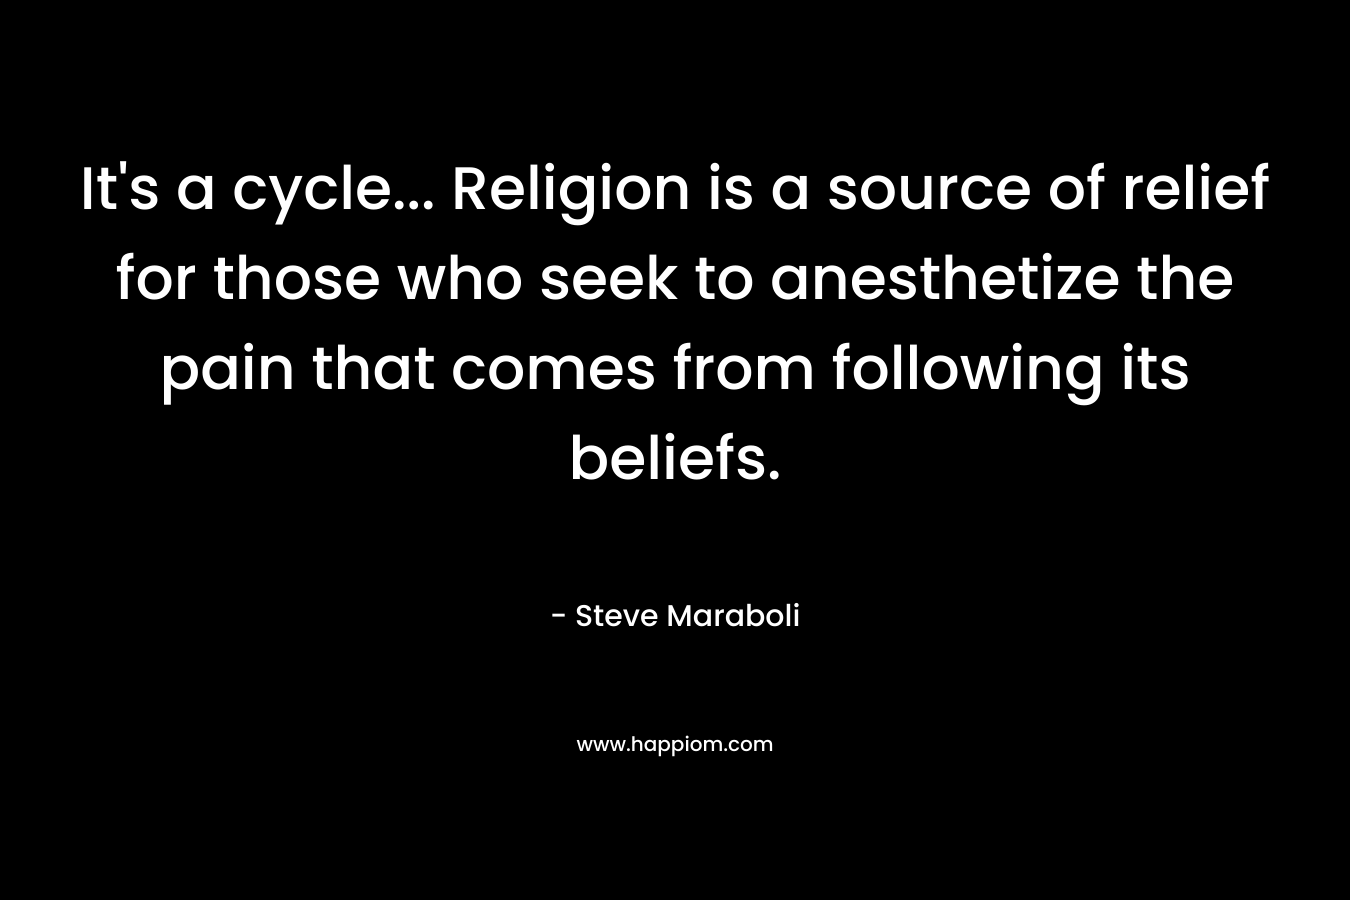 It's a cycle... Religion is a source of relief for those who seek to anesthetize the pain that comes from following its beliefs.